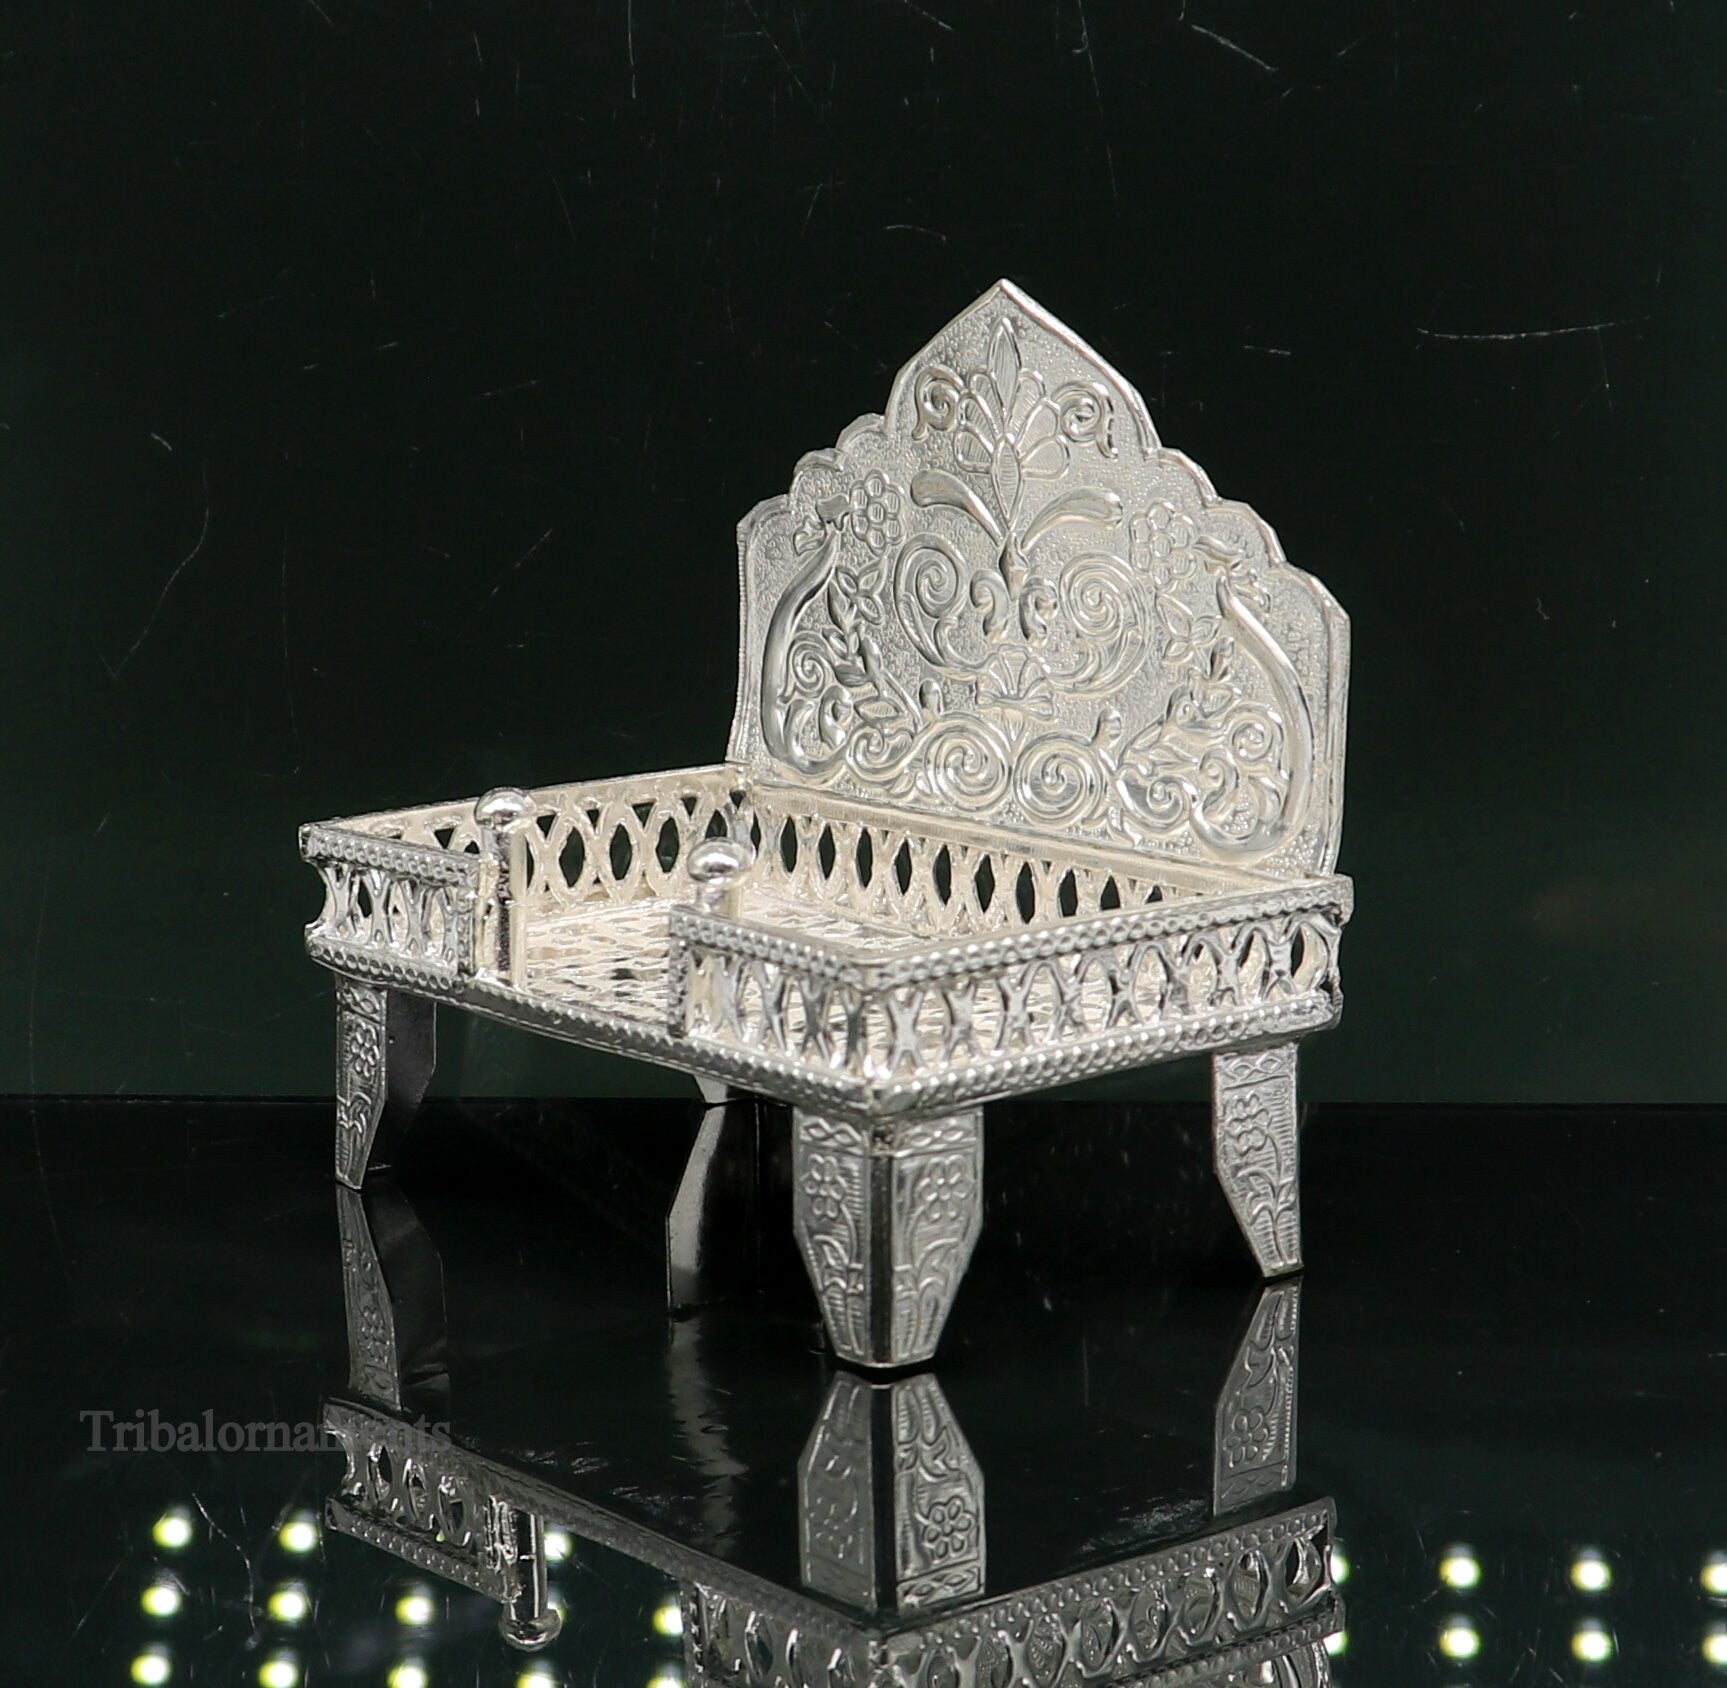 925 pure sterling silver handcrafted Singhasan,idols and goddess Throne, God statue Palna chair, temple art laddu gopal puja article su1015 - TRIBAL ORNAMENTS